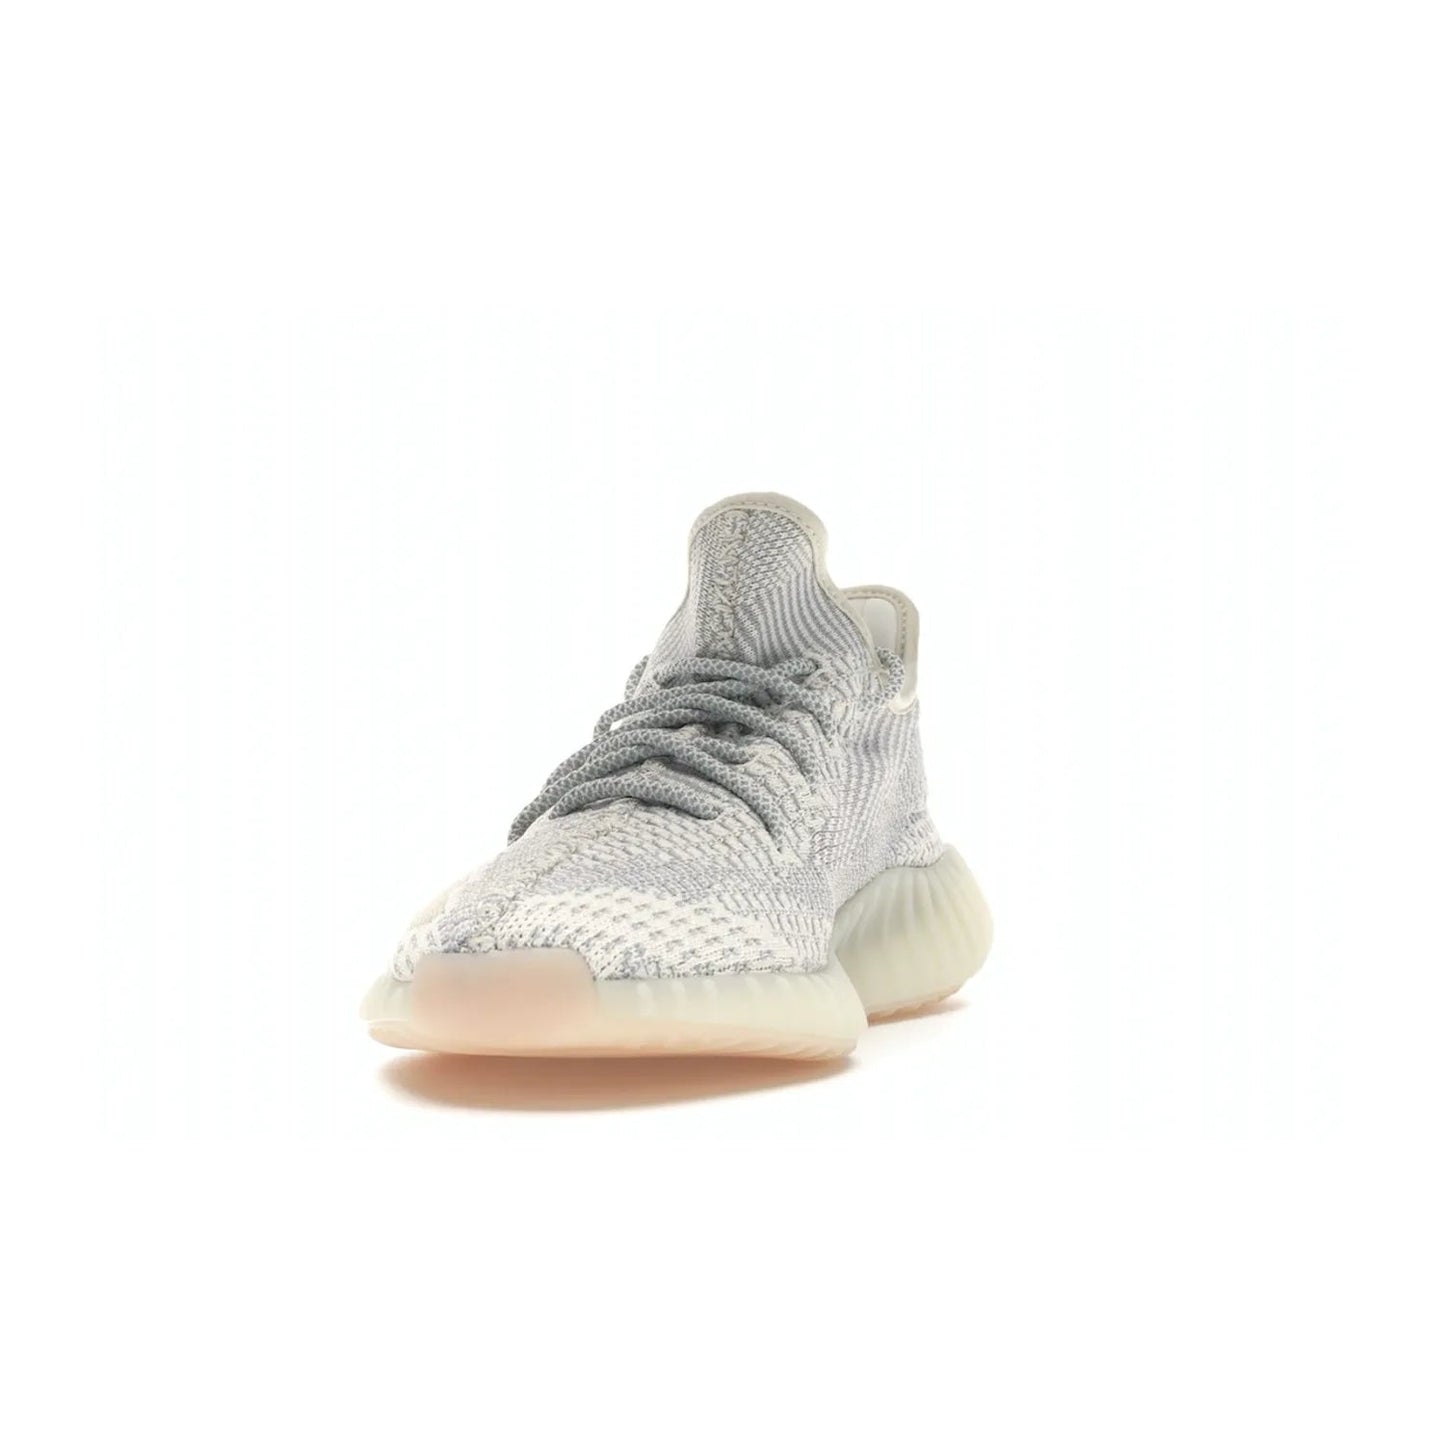 adidas Yeezy Boost 350 V2 Lundmark (Non Reflective) - Image 12 - Only at www.BallersClubKickz.com - Shop the exclusive adidas Yeezy Boost 350 V2 Lundmark with a subtle summer color, mesh upper, white-to-cream transitional midsole, light tan outsole, and pink middle stripe. Comfort and style come together in this perfect summer 350 V2. Released on July 11, 2019.